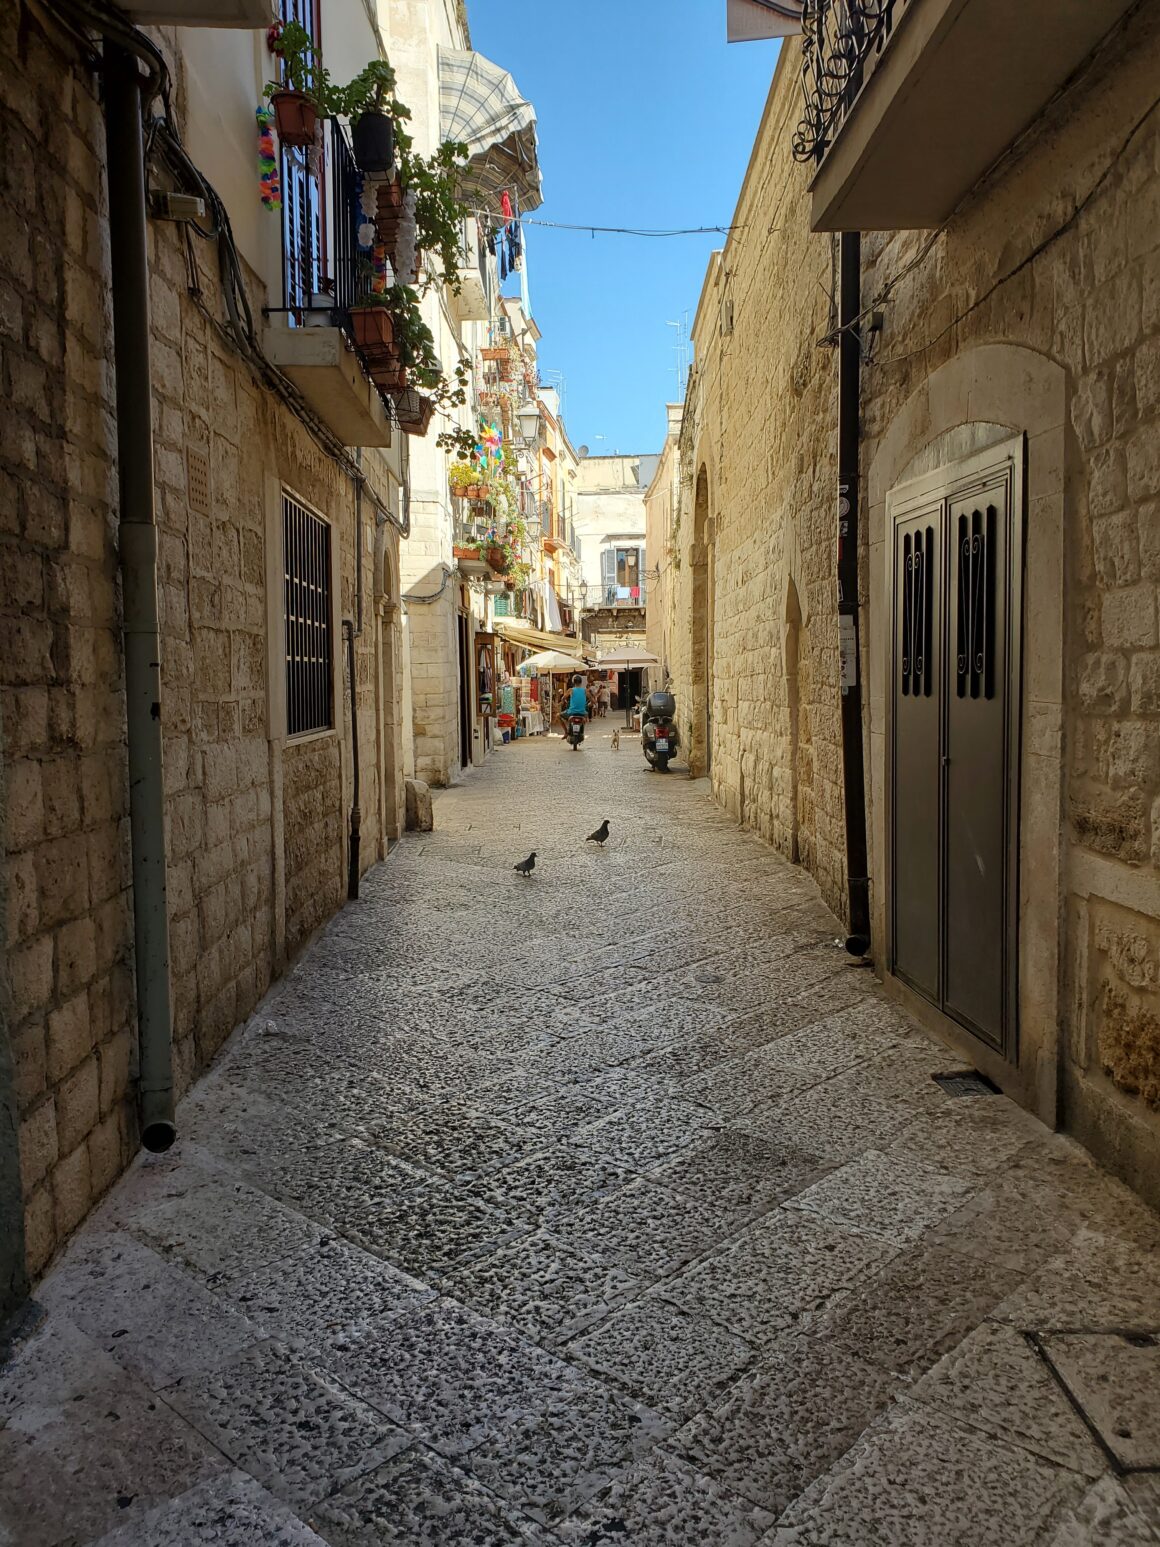 The winding streets of Old Town in Bari, Italy